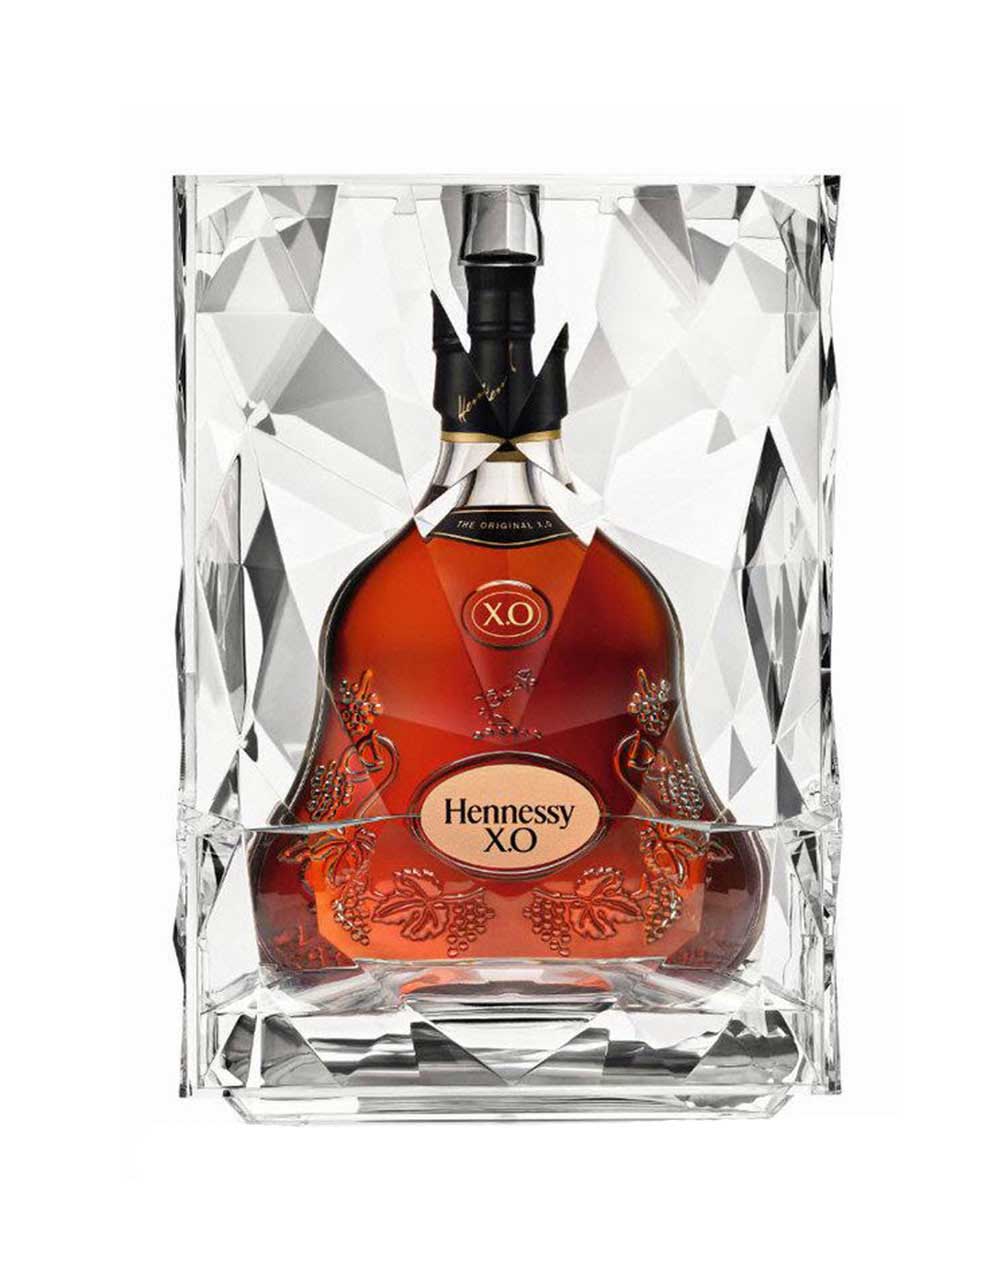 Hennessy X.O Cognac Ice Experience 2018